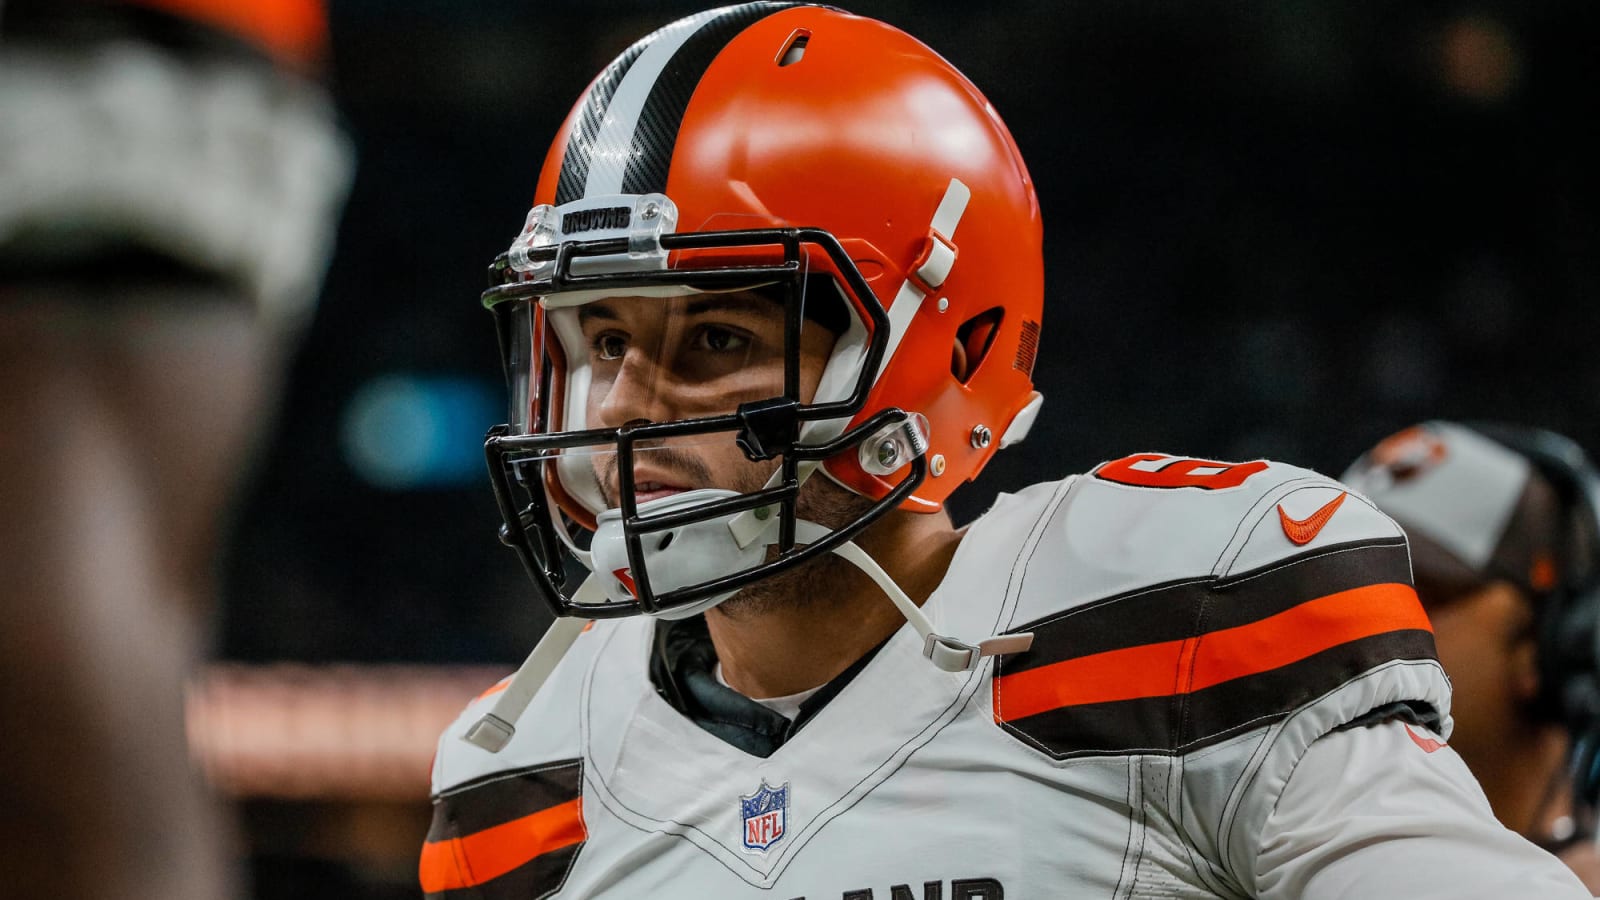 Twitter reacts to Baker Mayfield balling out in NFL debut